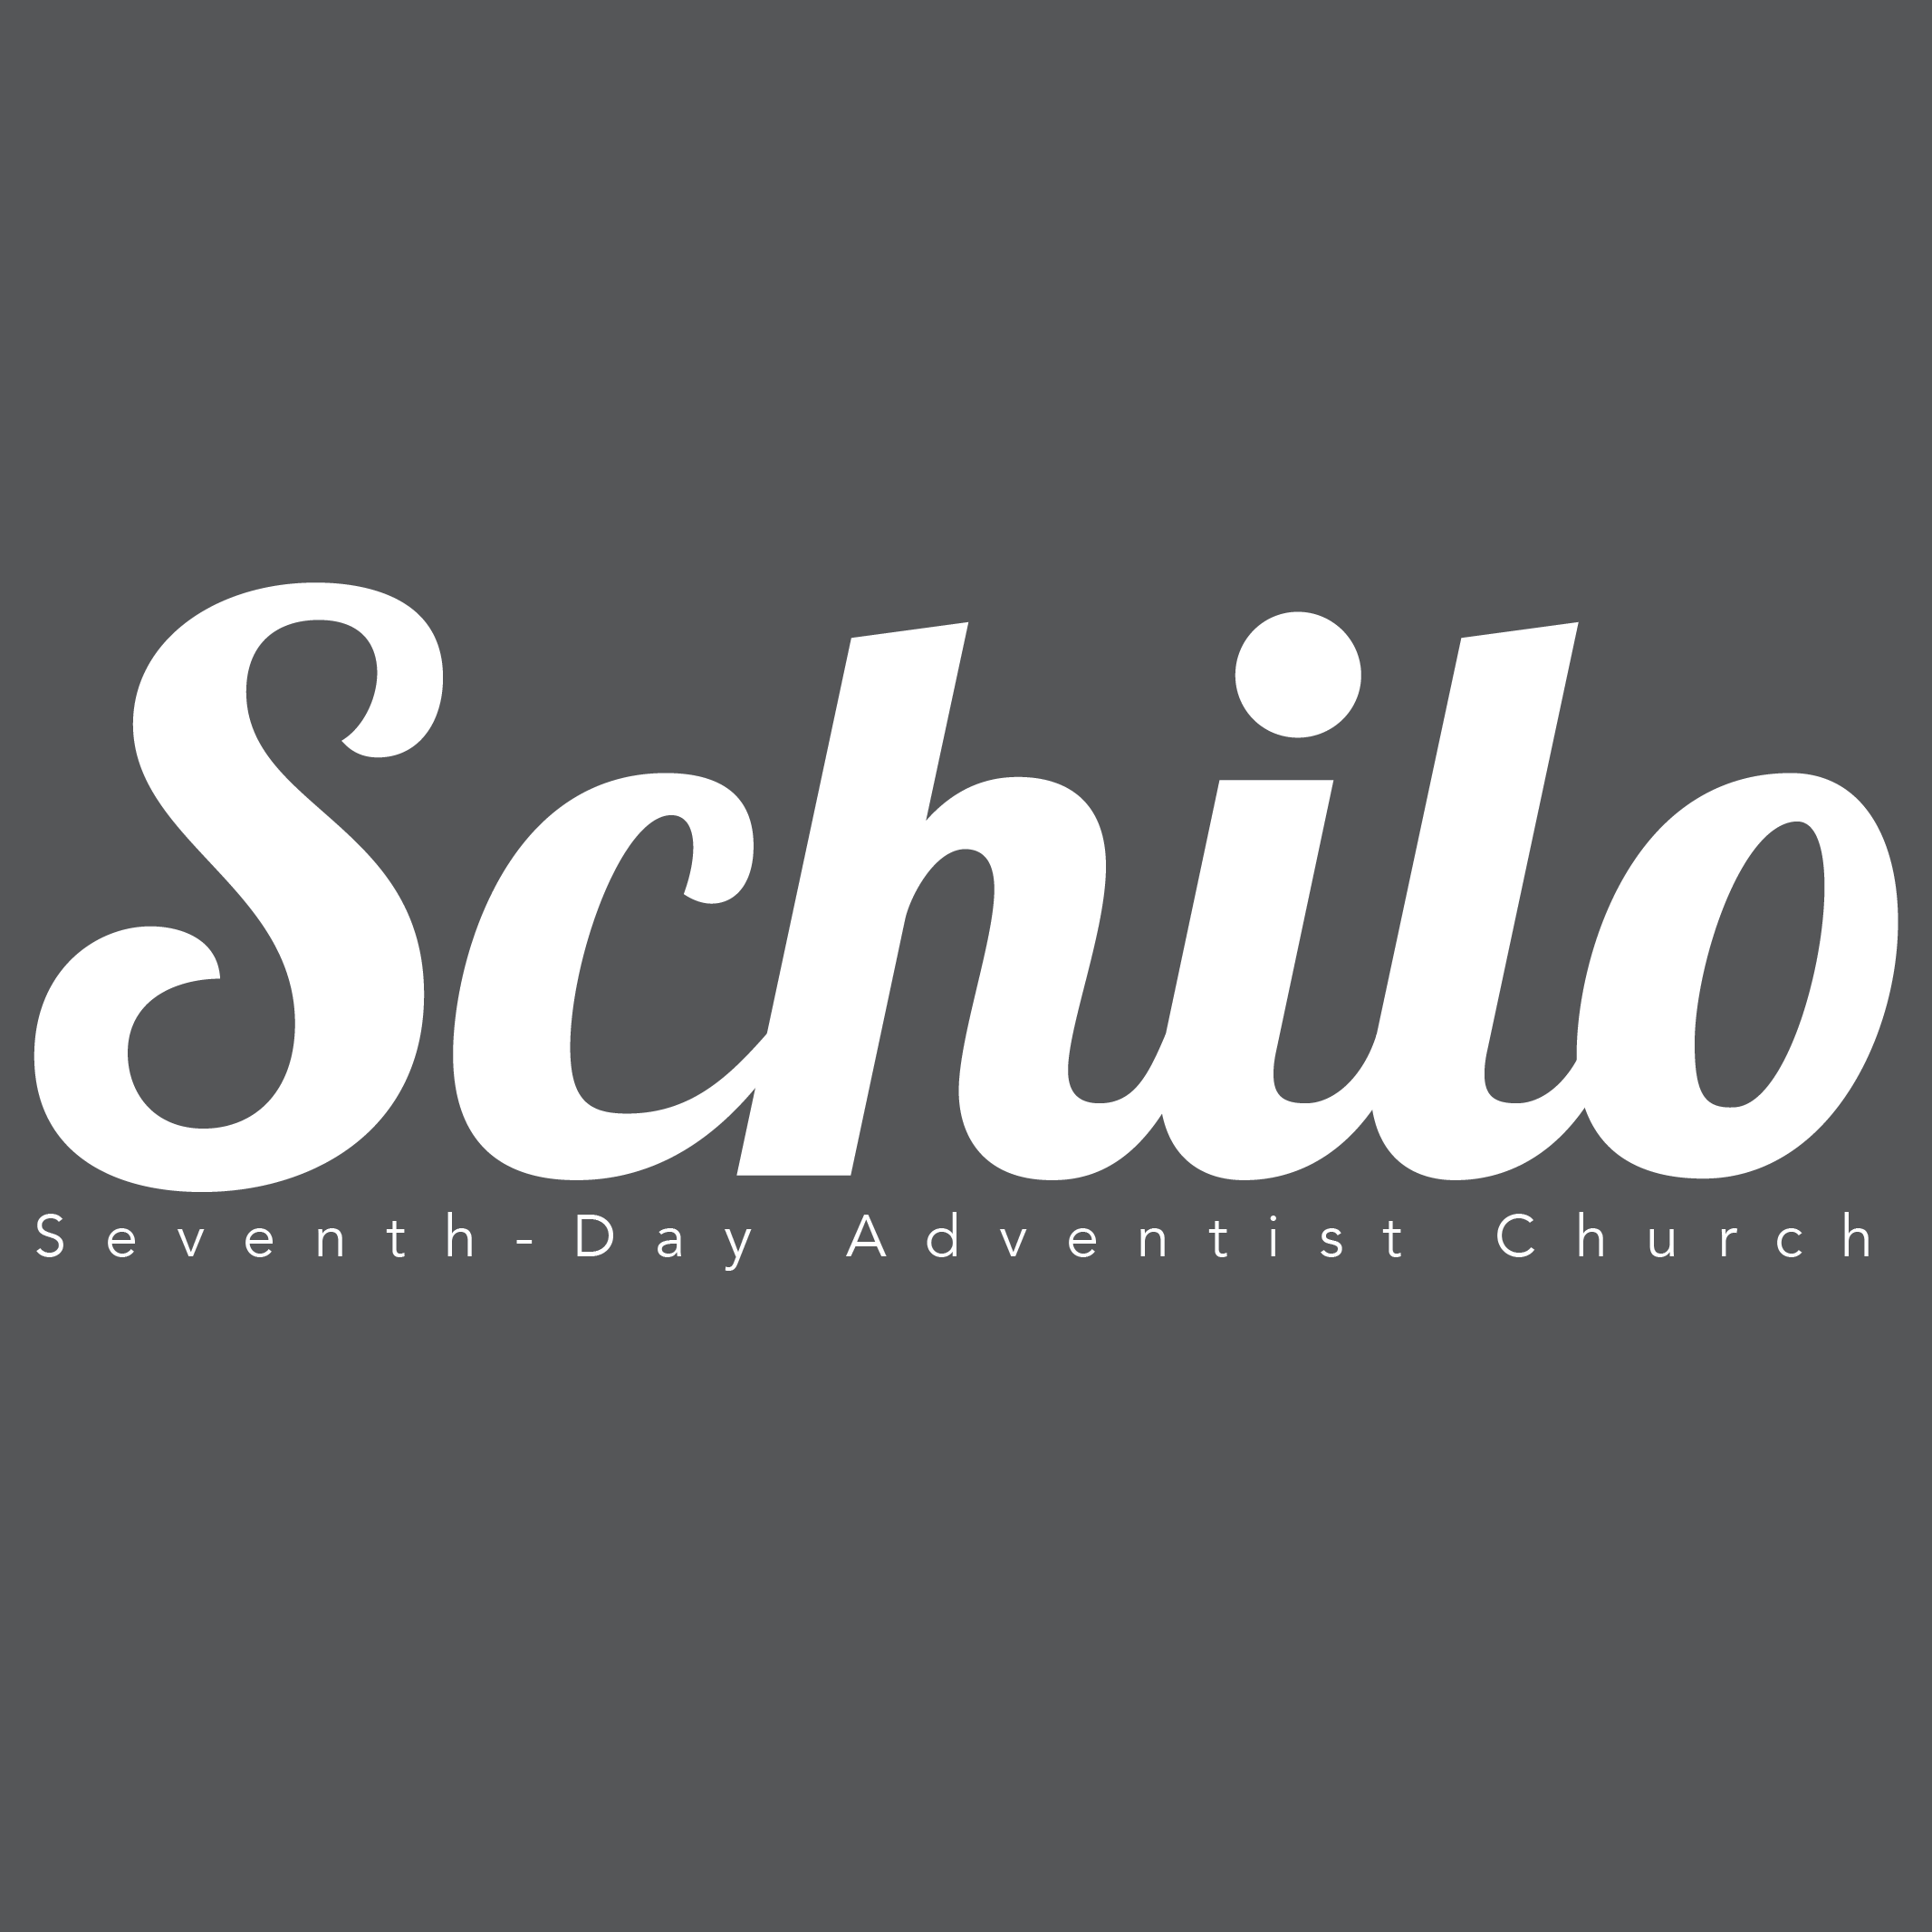 Home of the Announcement Board of Schilo Seventh-day Adventist Church. Visit us at http://t.co/IiOmjASdZT